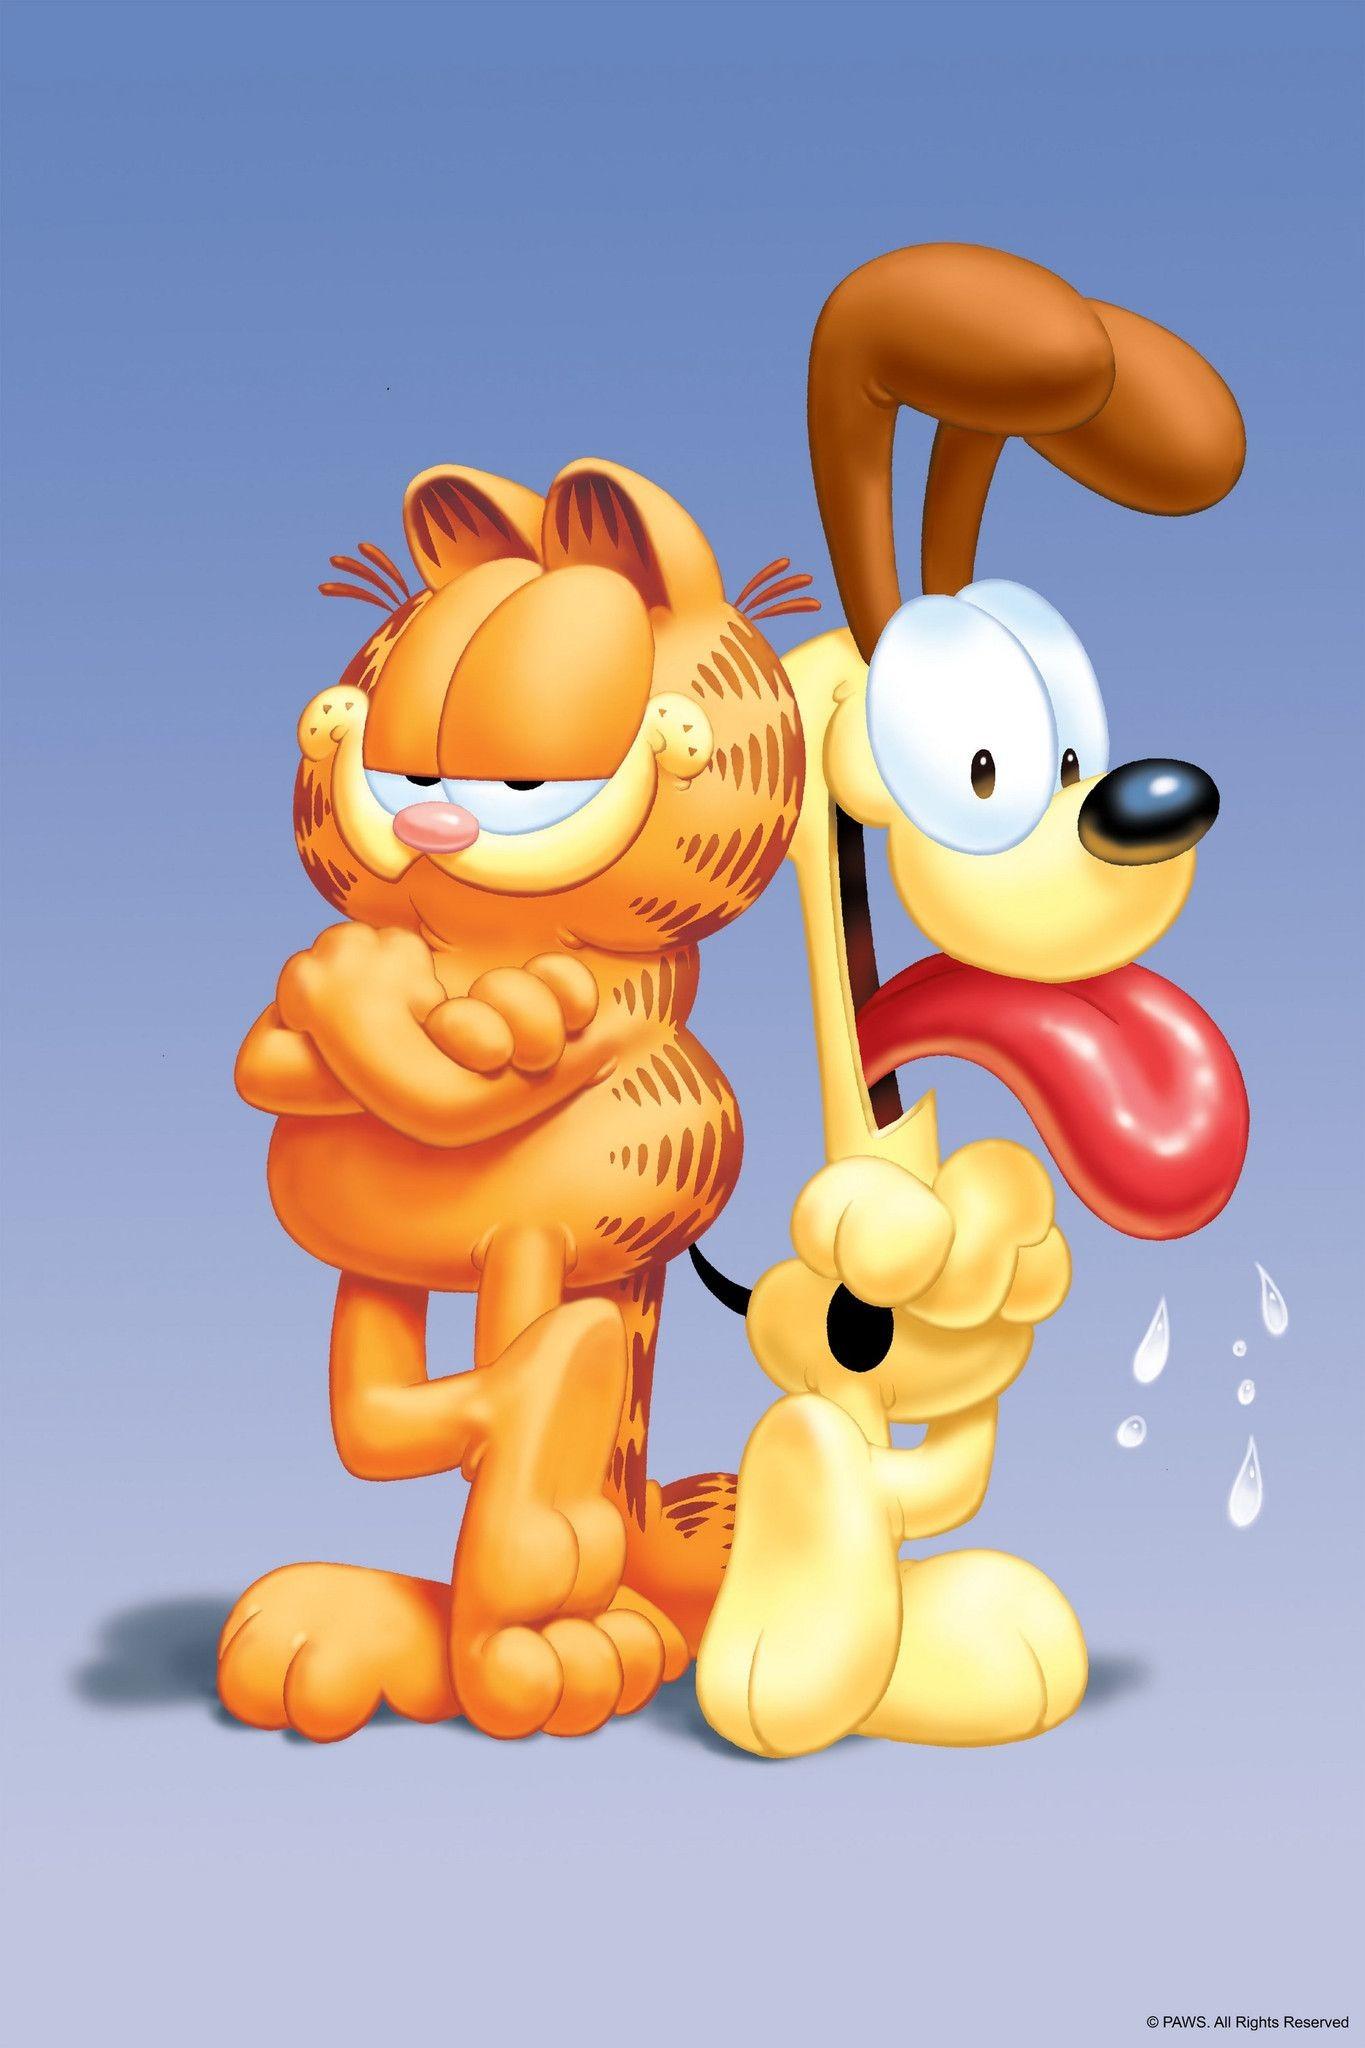 Funny Garfield Wallpaper (69+ images)